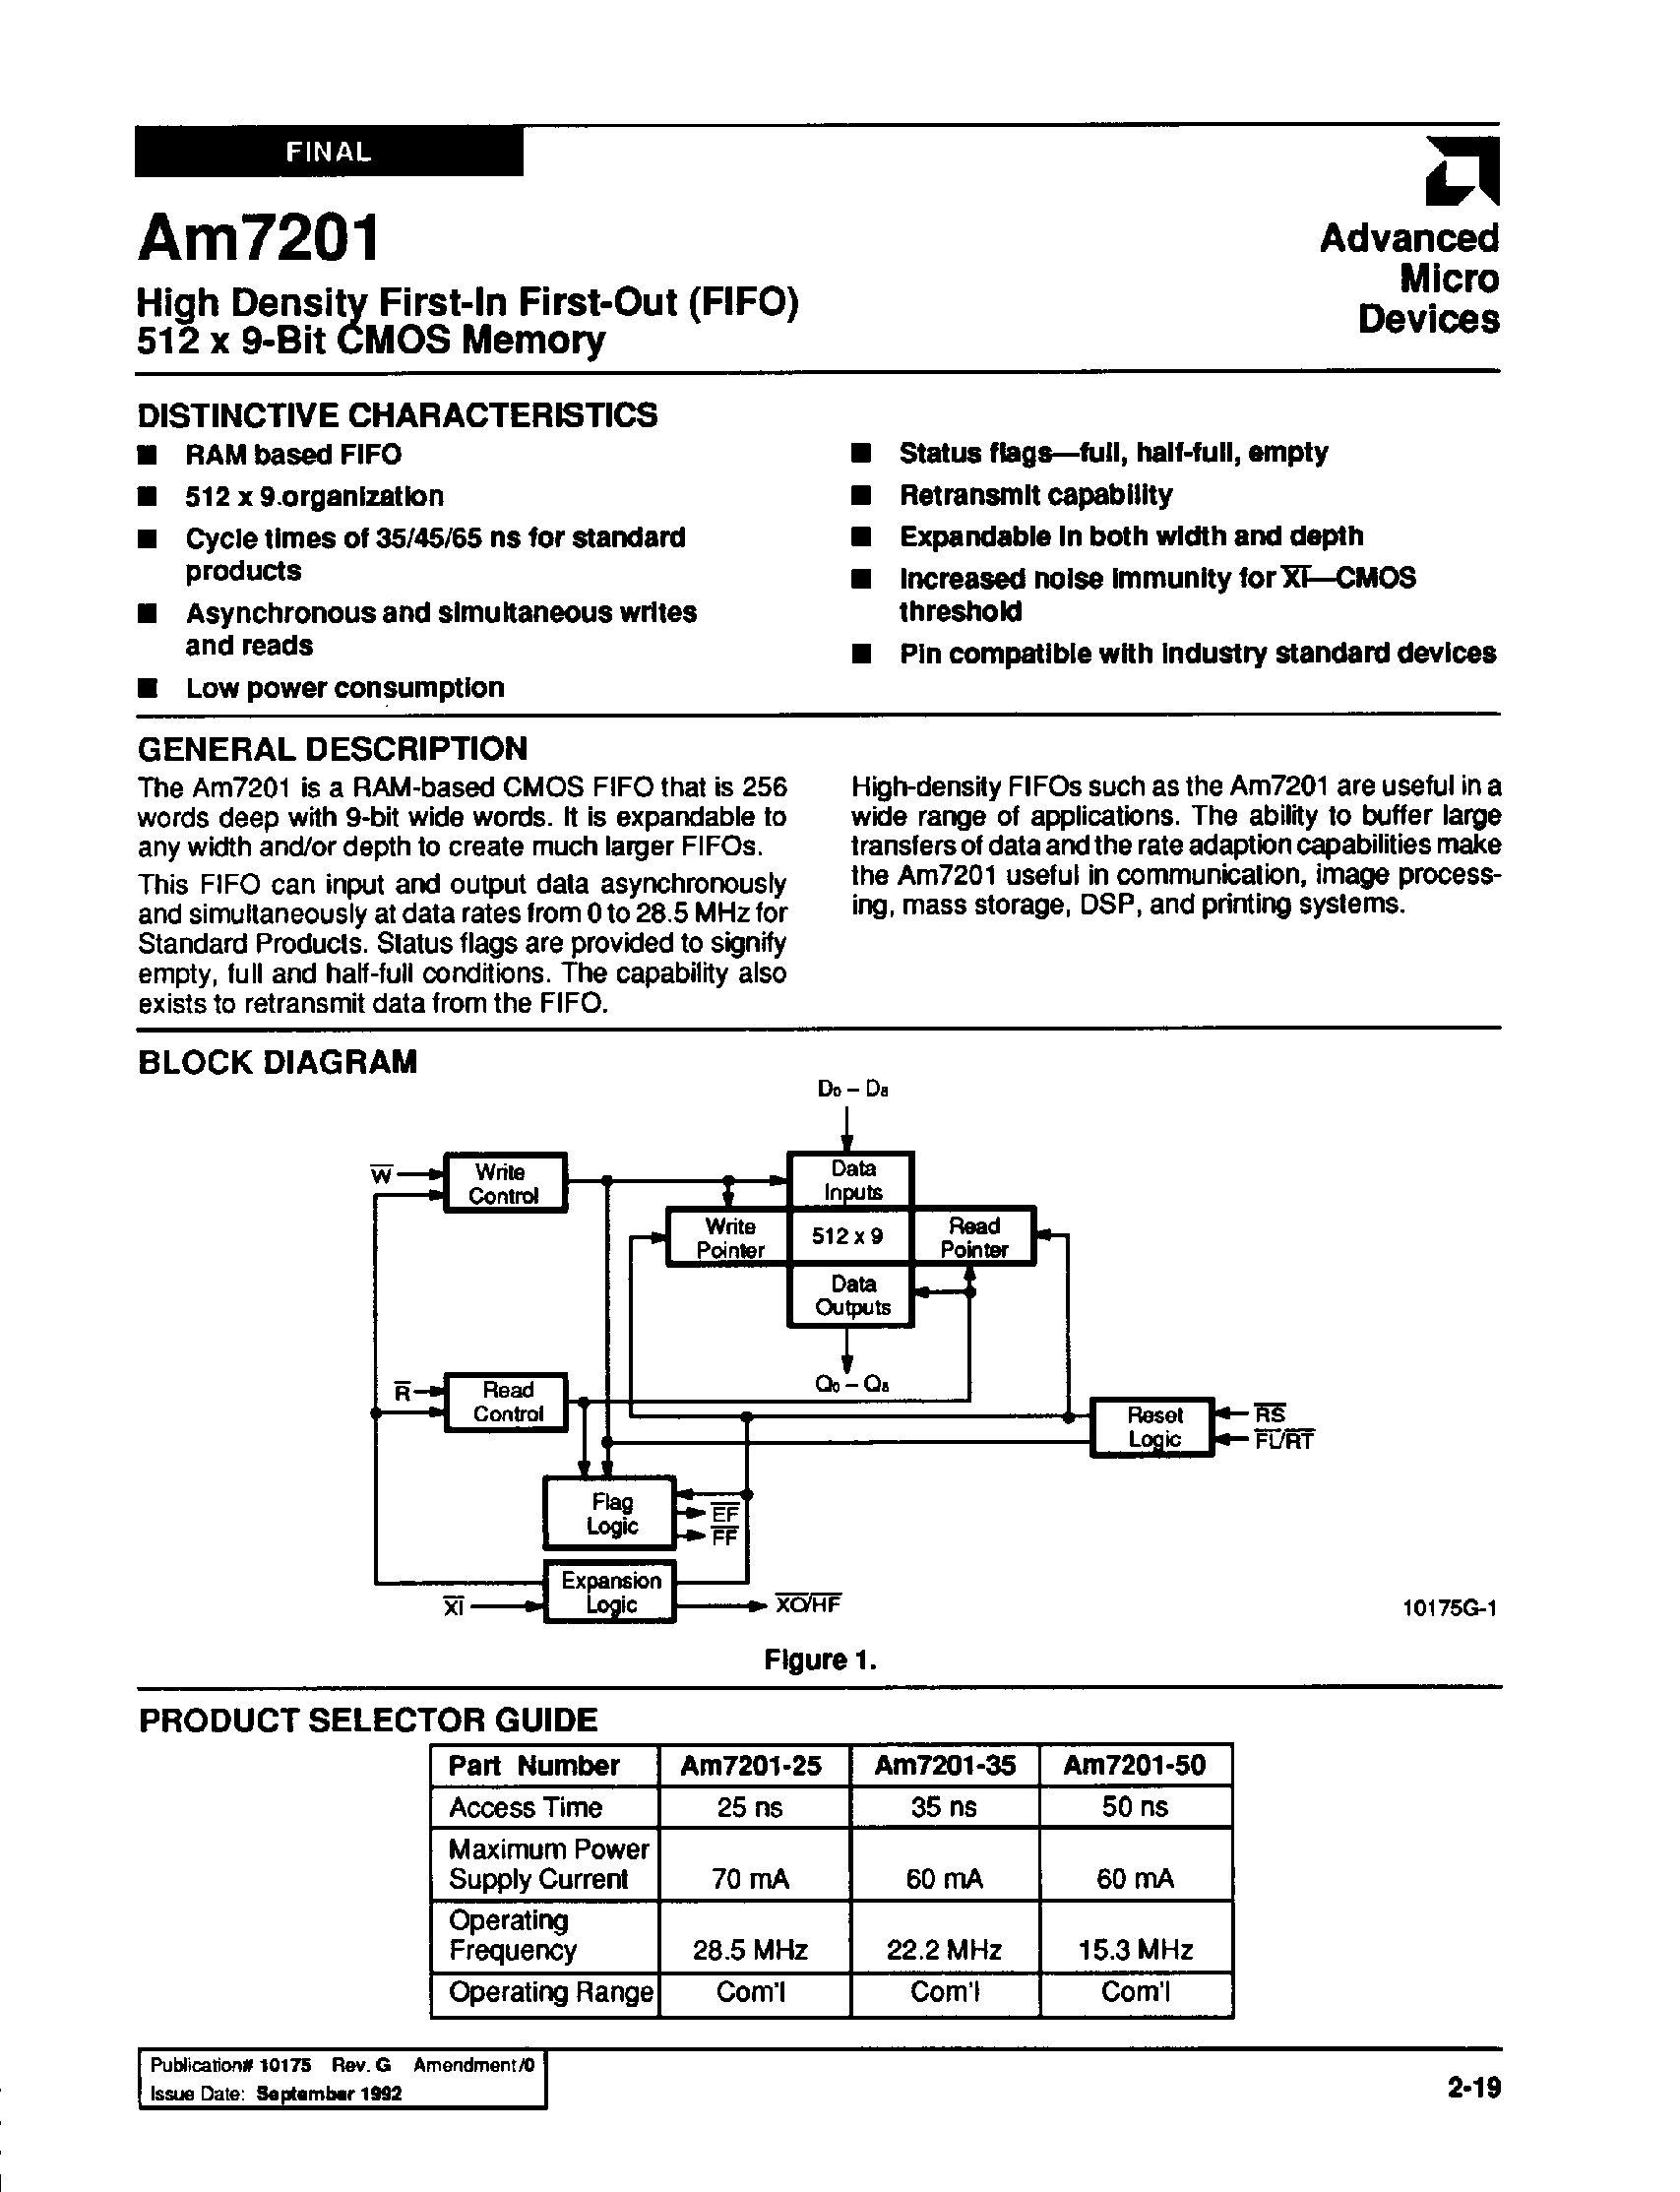 Datasheet Am7201-50PC - HIGH DENSITY FIRST-IN FIRST-OUT(FIFO) 512 x 9-BIT CMOS MEMORY page 1